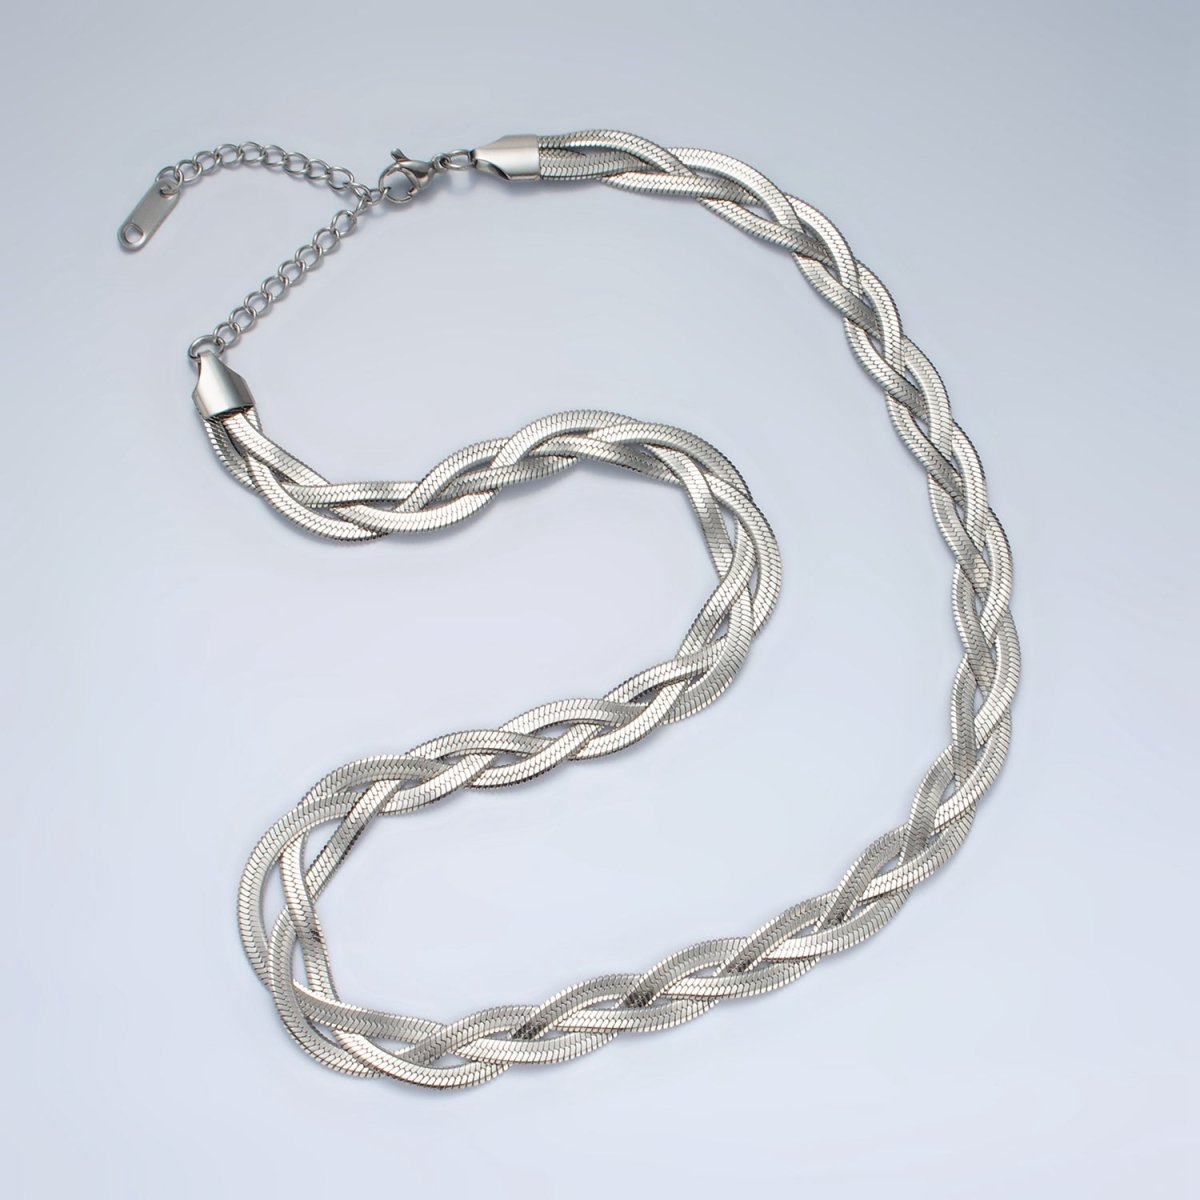 Stainless Steel 7.6mm Triple Herringbone Chain Necklace in Gold, Silver, Mixed Metal | WA - 2530 ~ WA - 2532 - DLUXCA